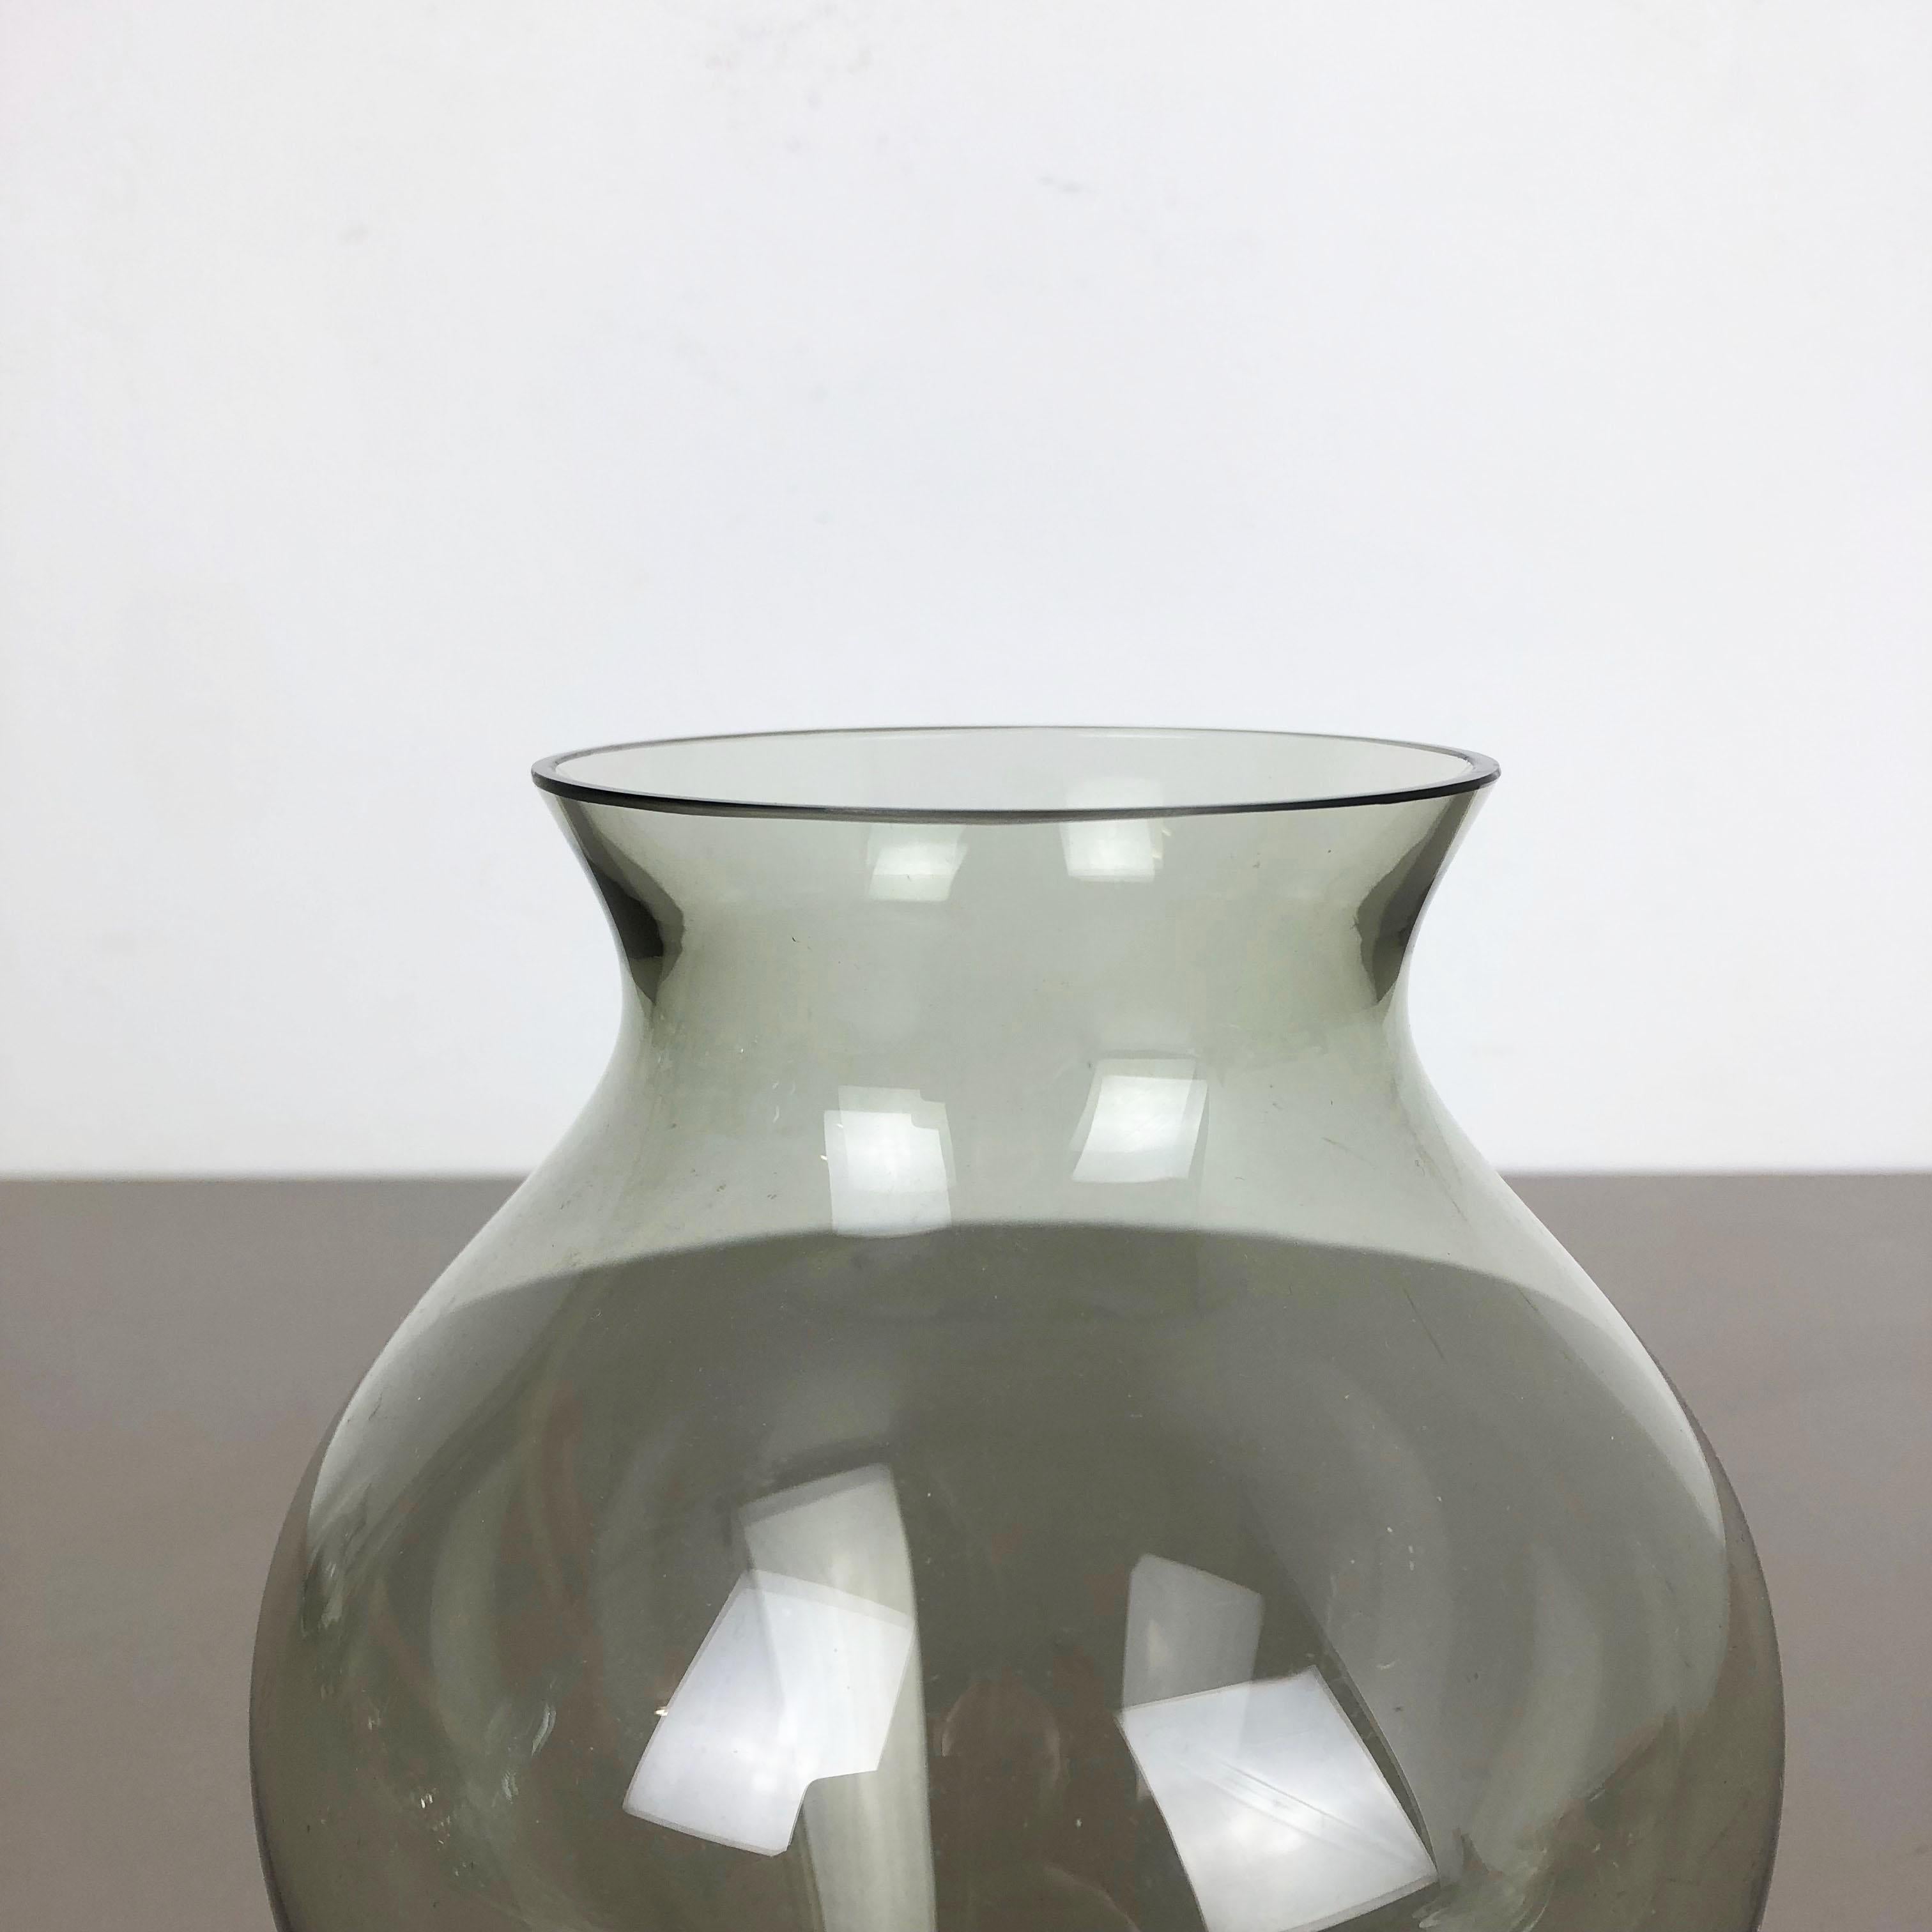 20th Century Vintage 1960s Turmalin Vase by Wilhelm Wagenfeld for WMF, Germany Bauhaus For Sale